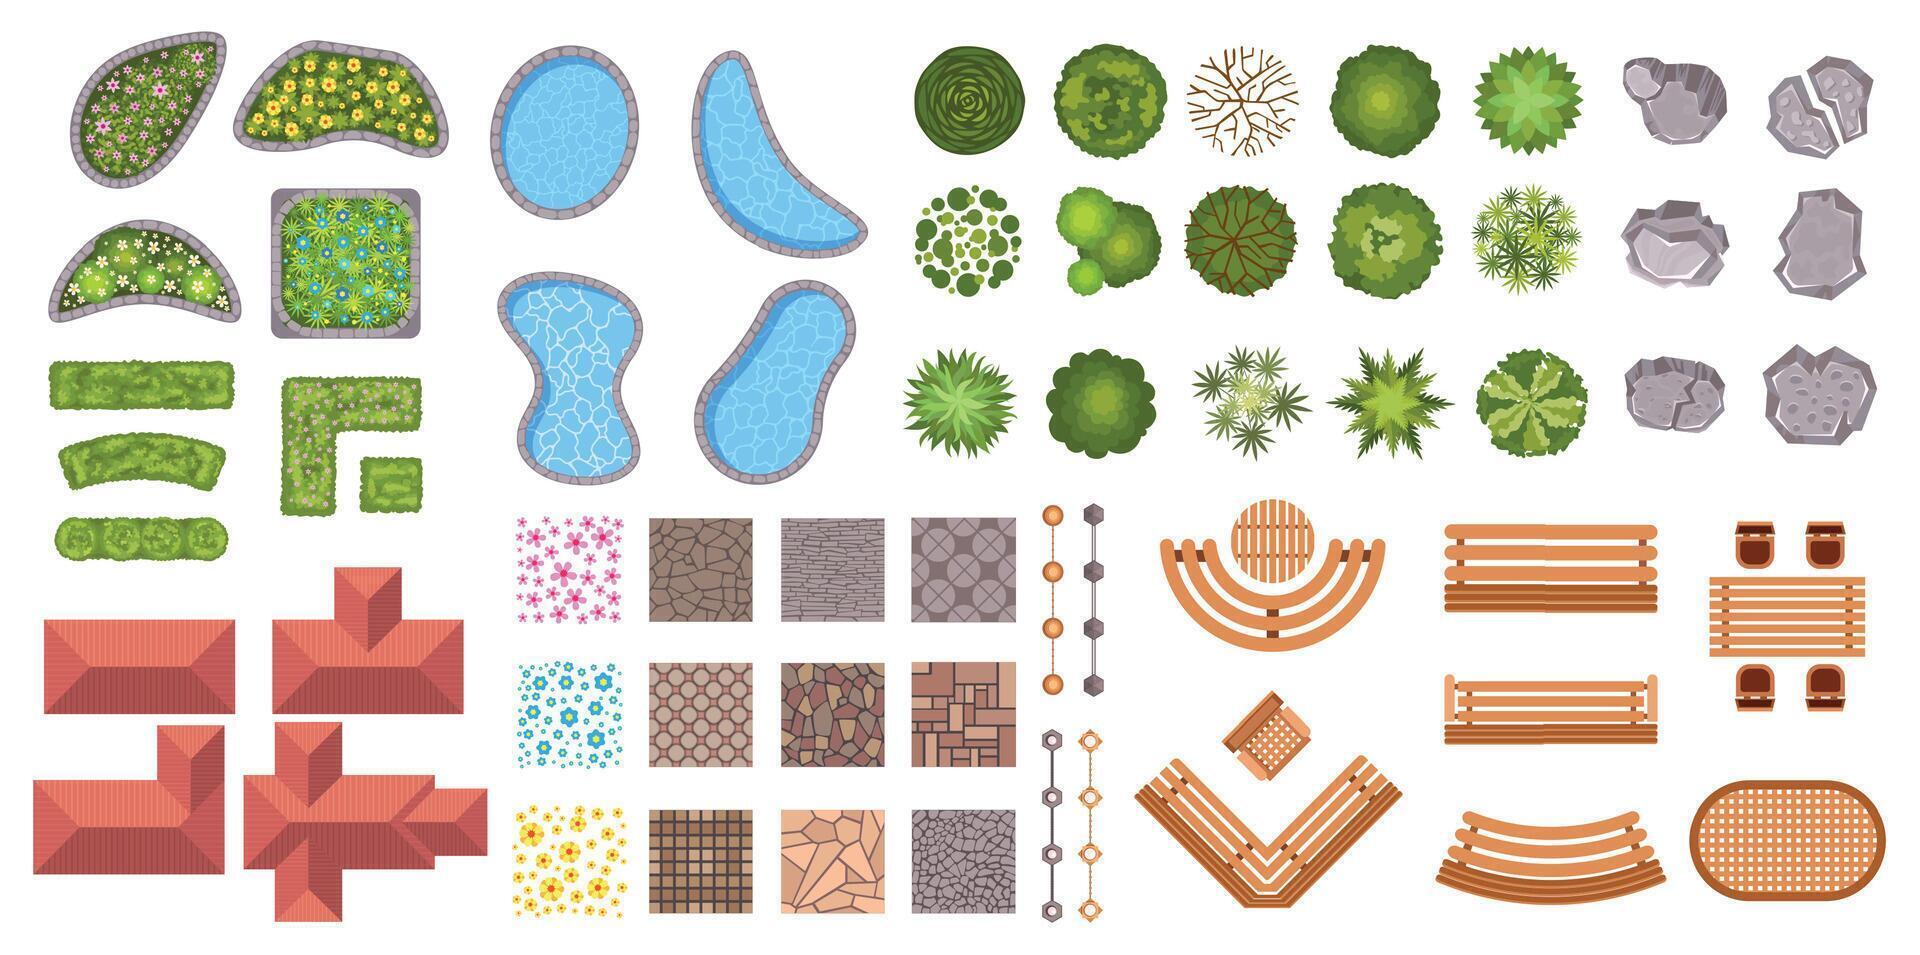 Garden landscape design elements aerial top view. Bush fence, flowers, ponds, houses and sidewalk icons. Park plan map from above vector set